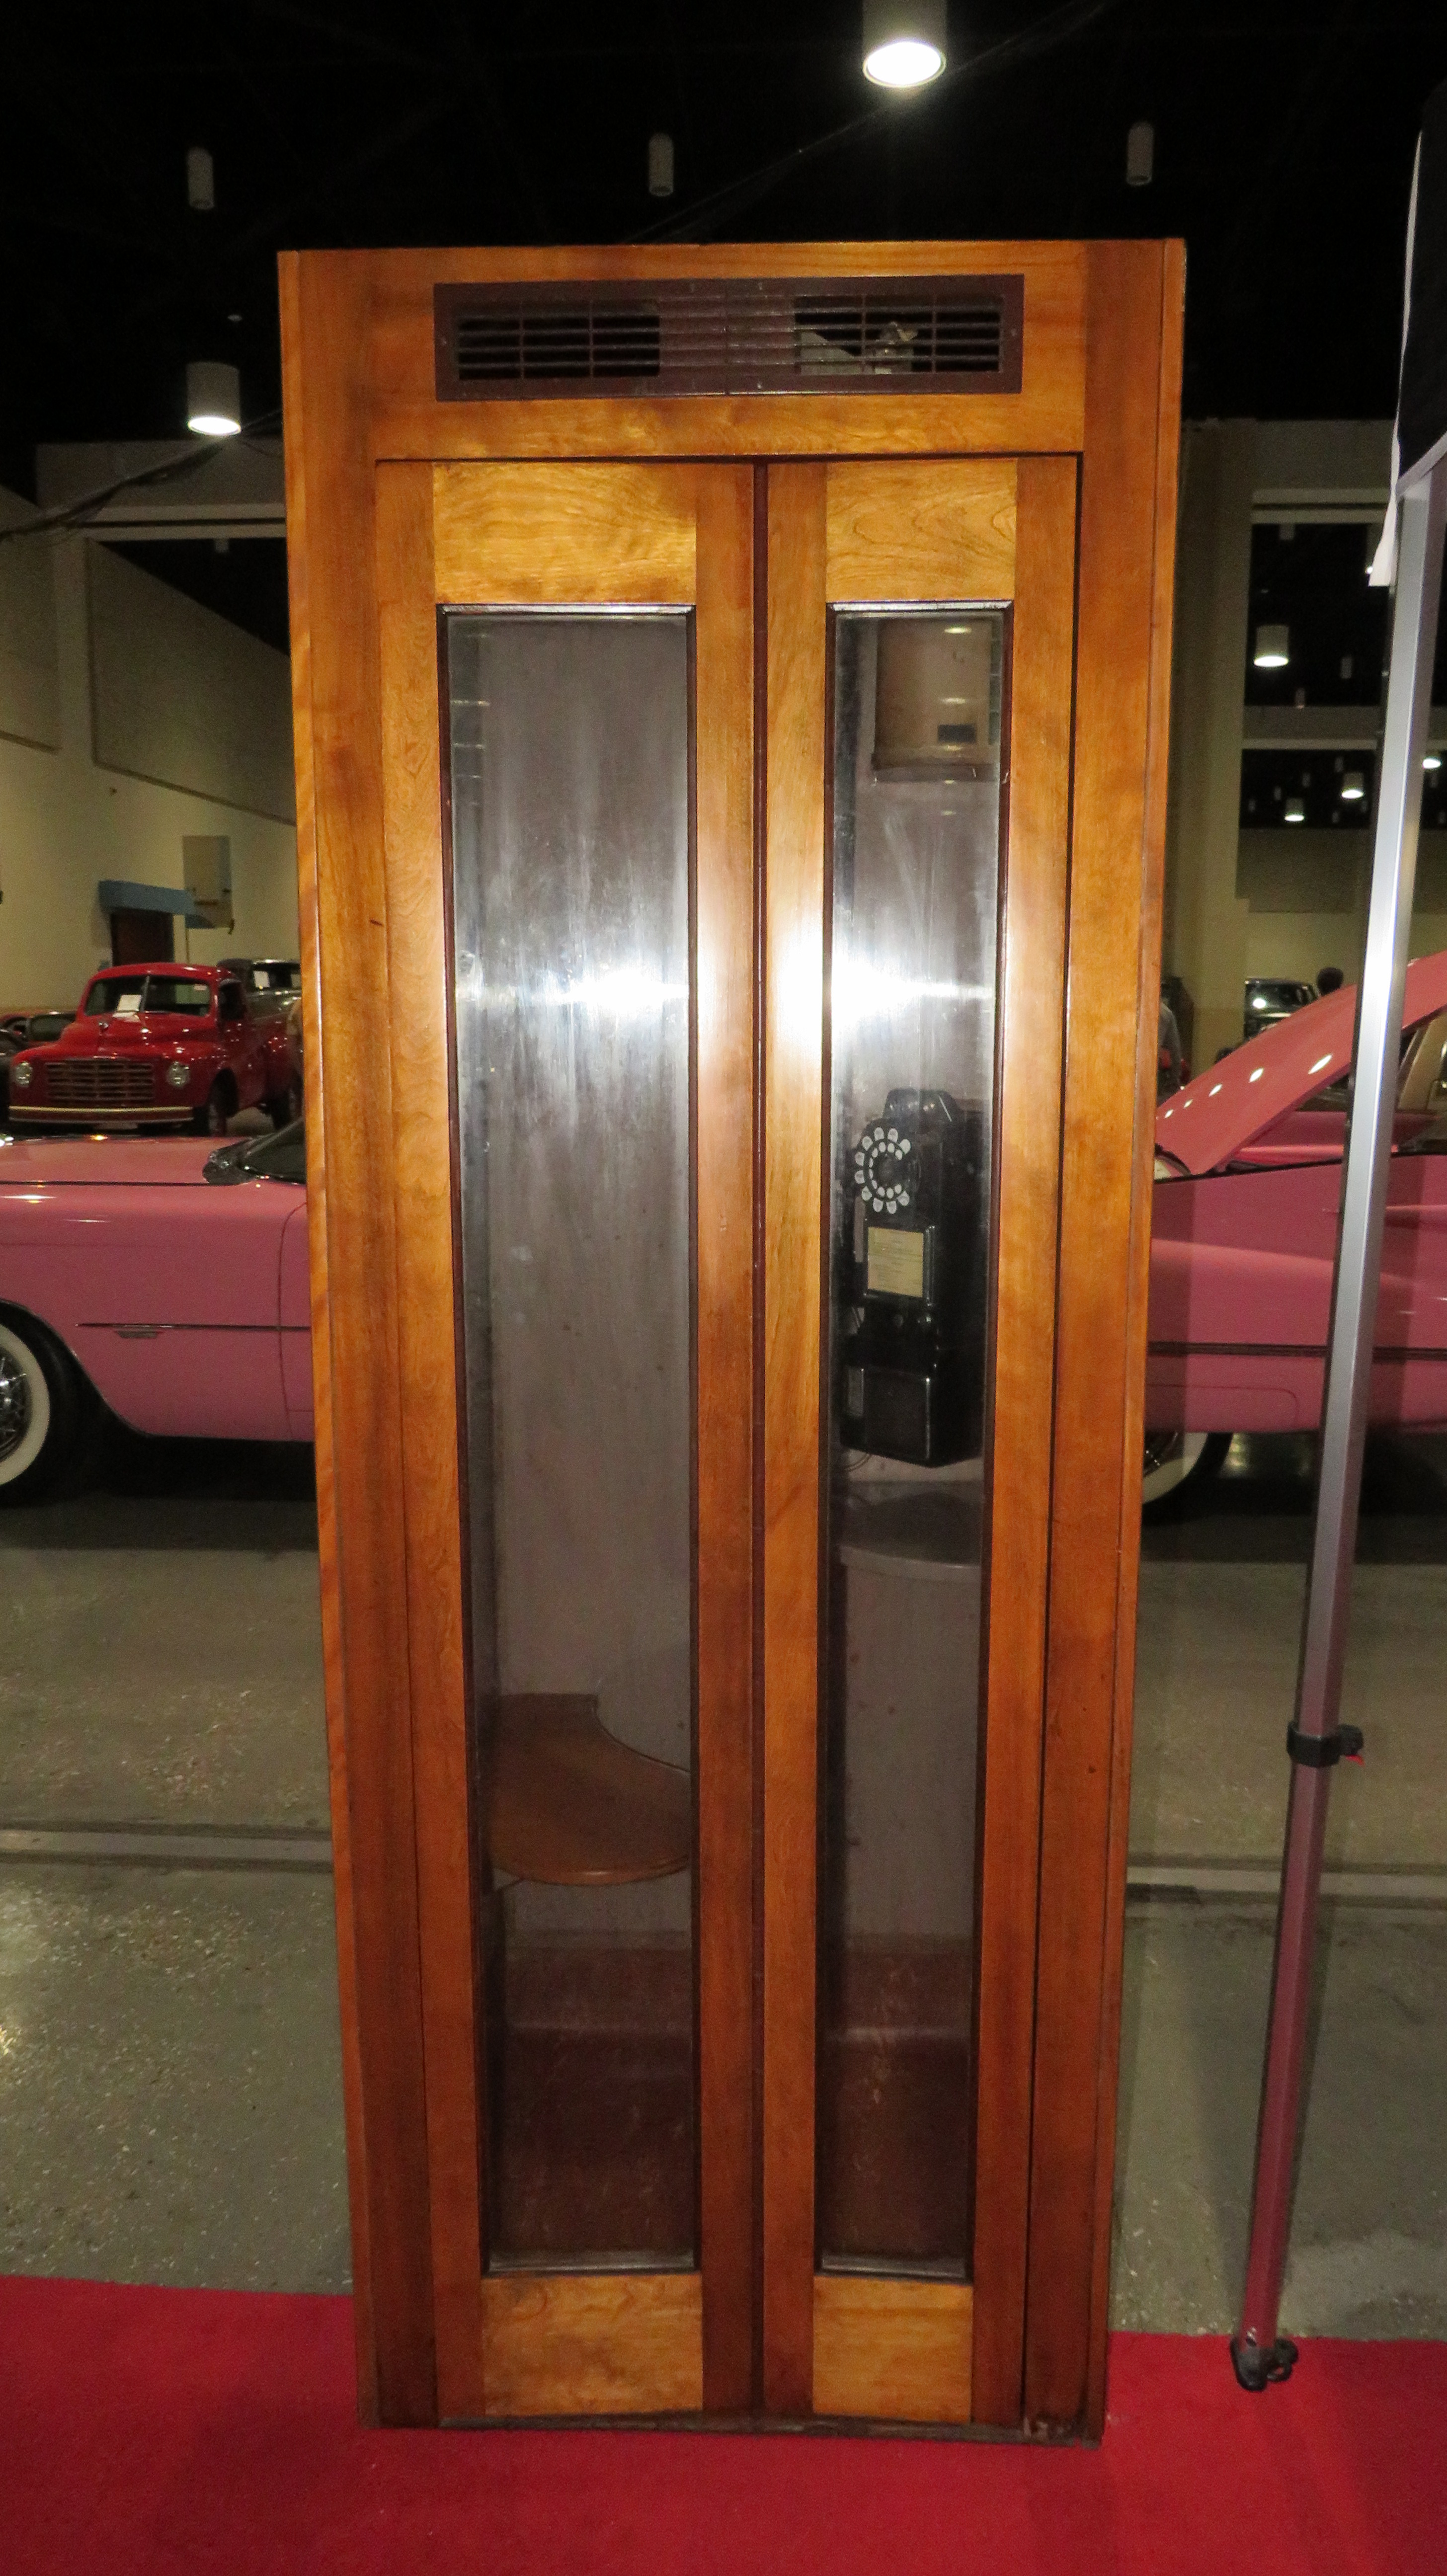 3rd Image of a N/A PHONE BOOTH